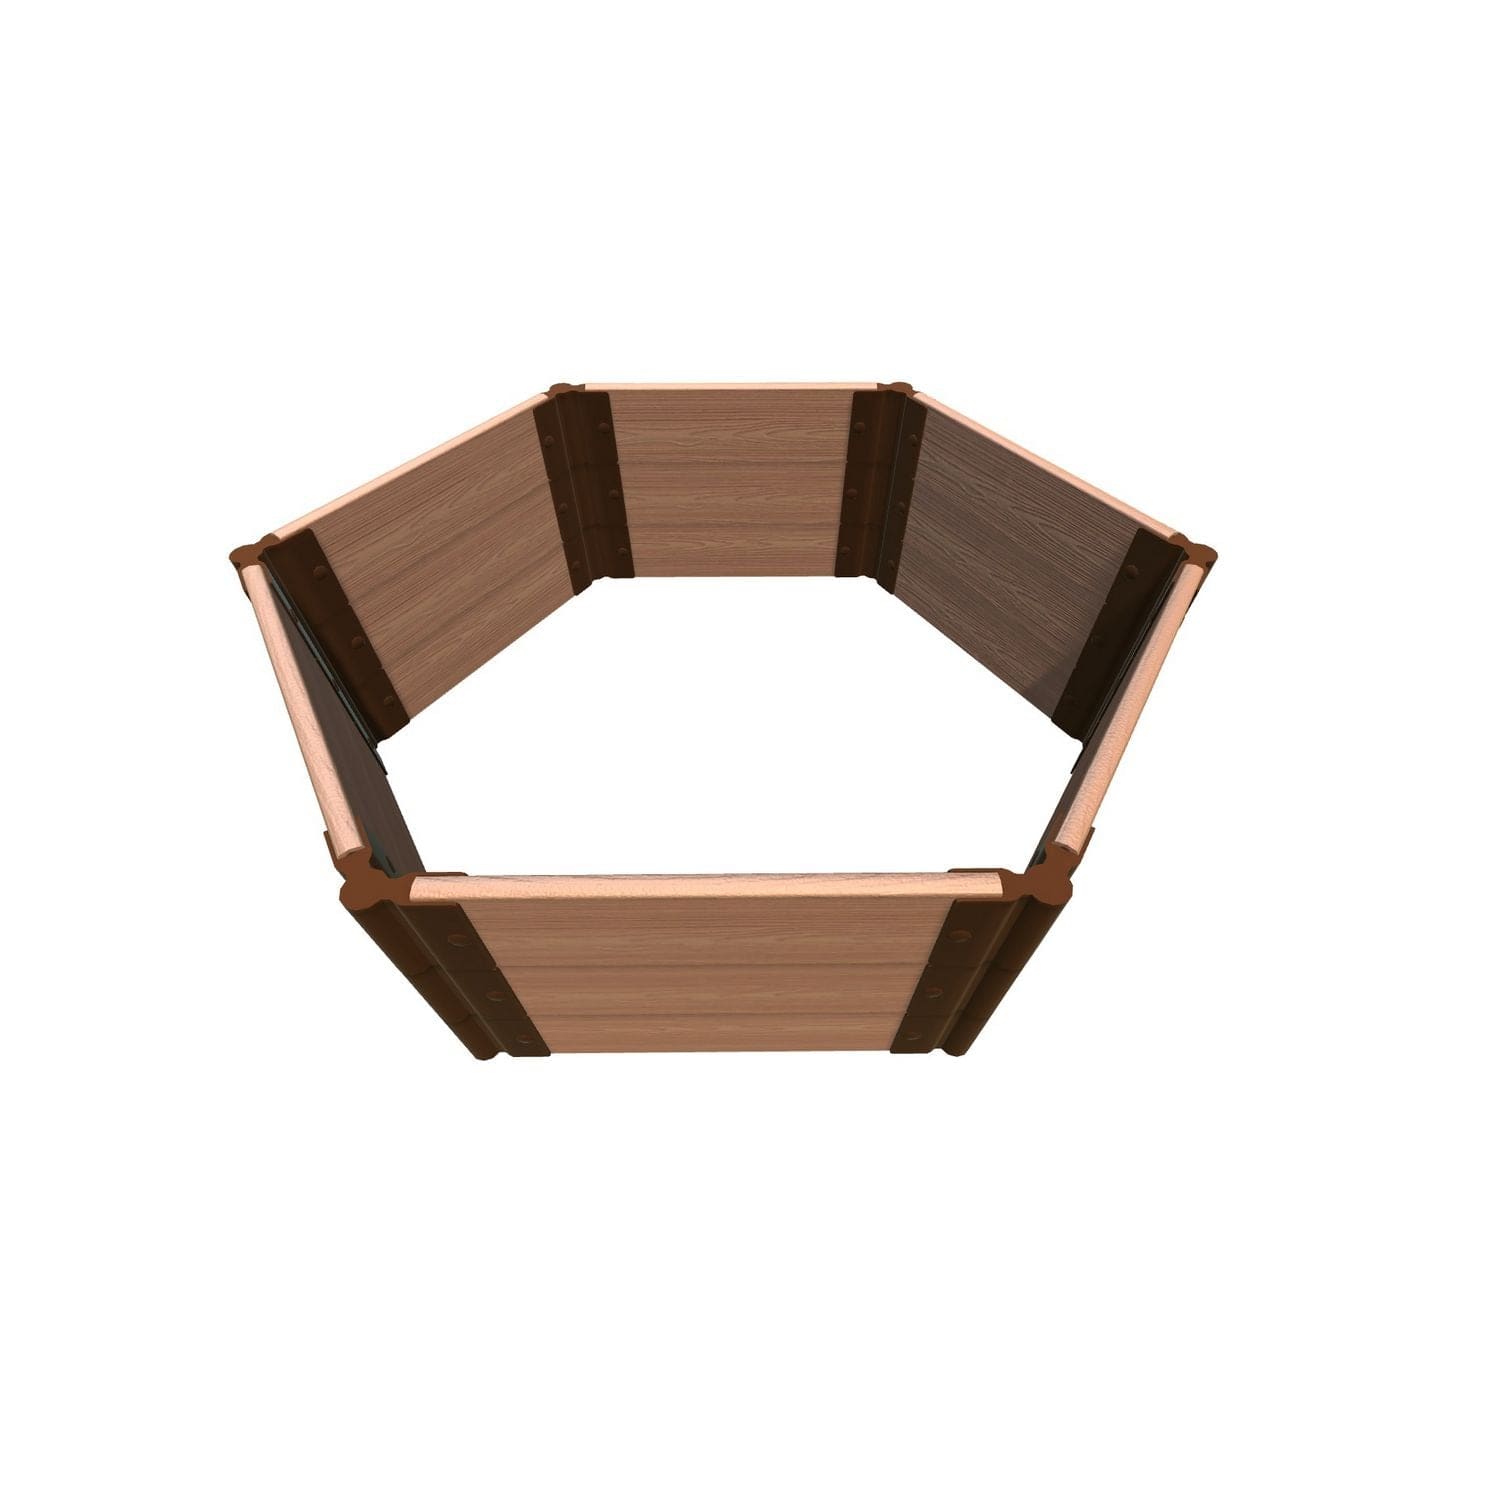 Frame It All Gardening Accessories 1" Frame It All | Tool-Free Fort Jefferson Raised Garden Bed (Hexagon) 4' X 4' X 16.5" - Classic Sienna 200003467